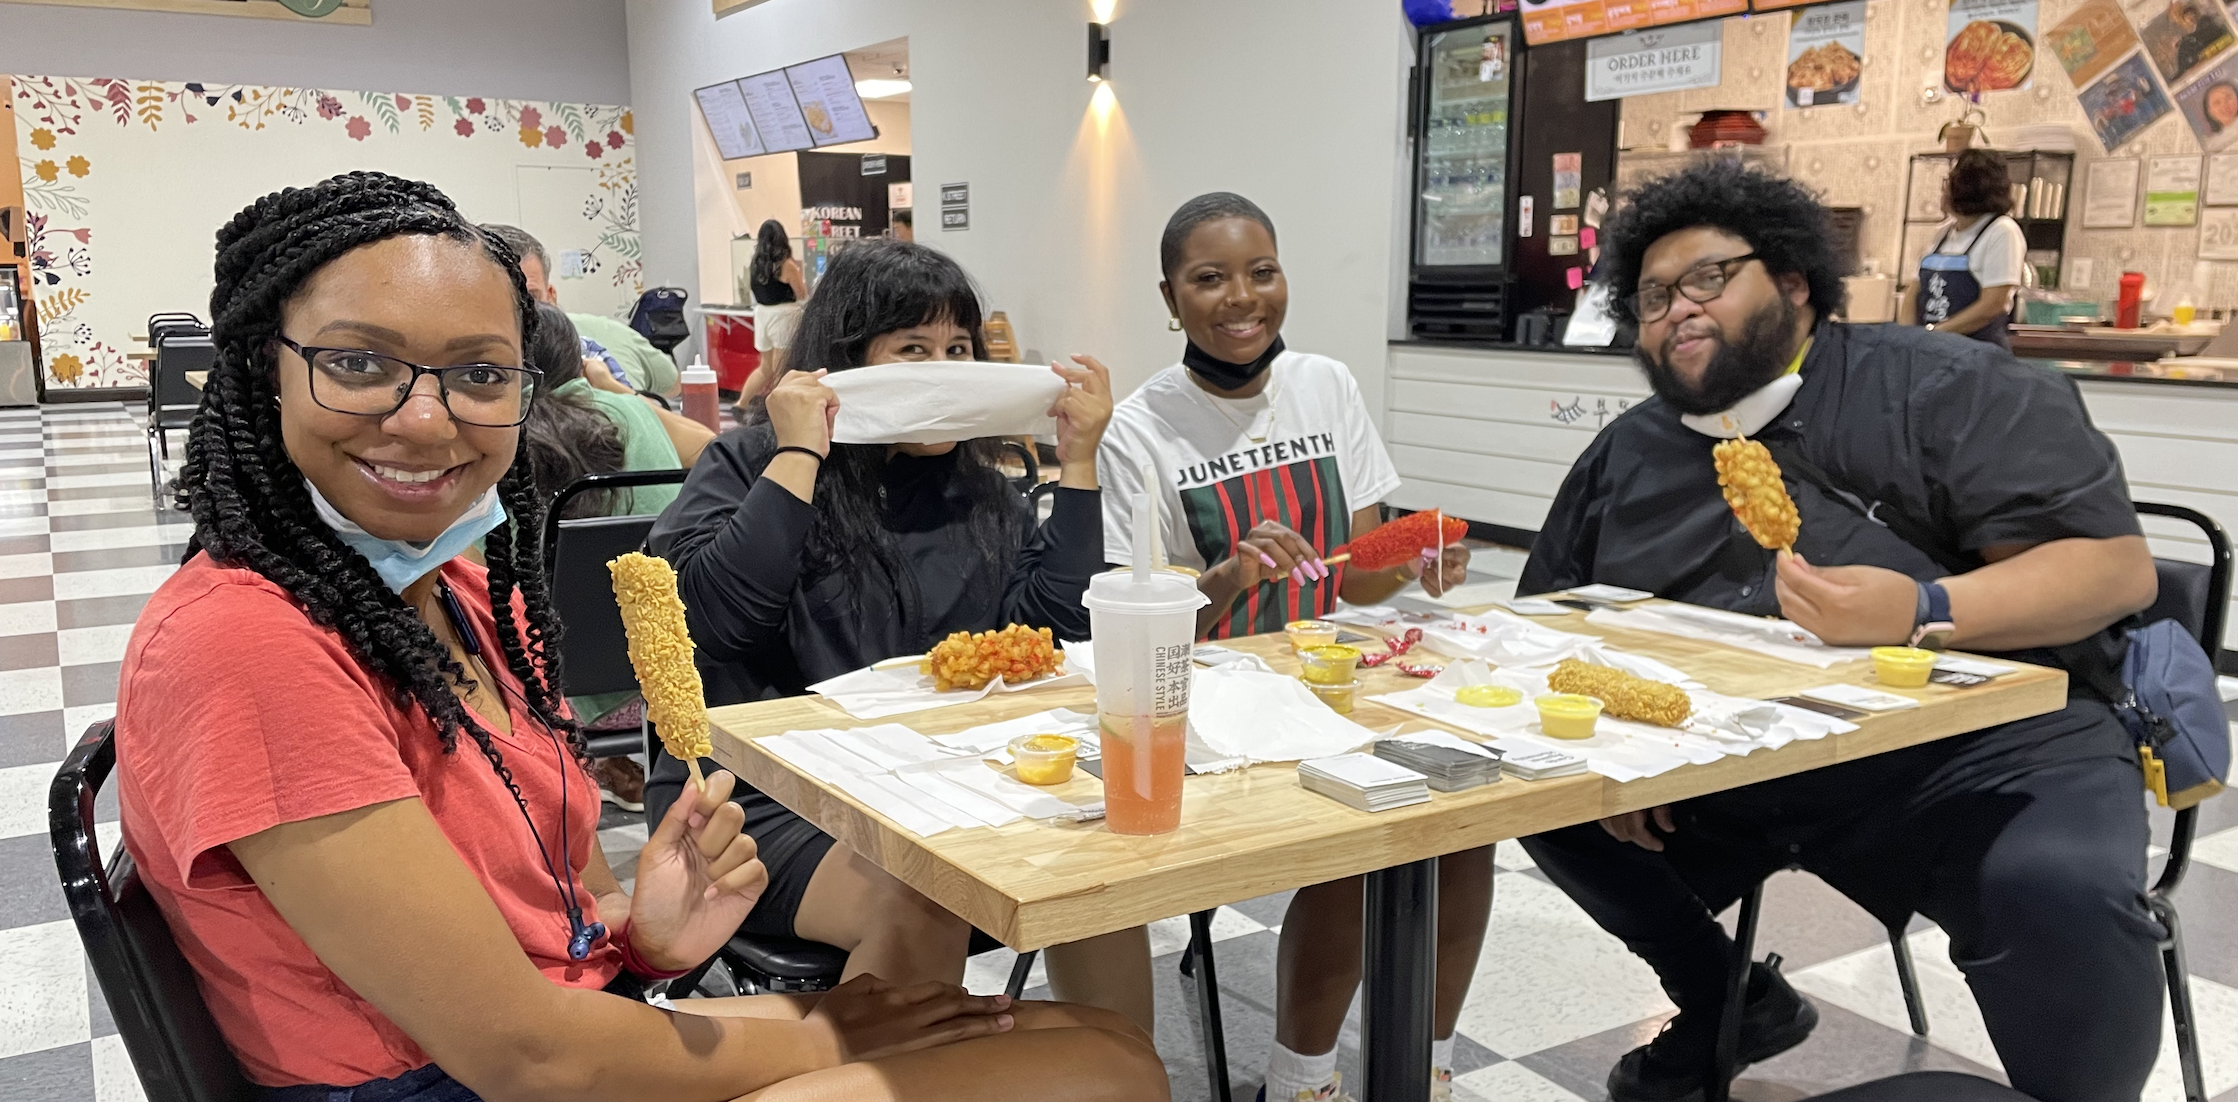 Our team of BIPOC designers enjoying Korean corn dogs in a grocery foodcourt.